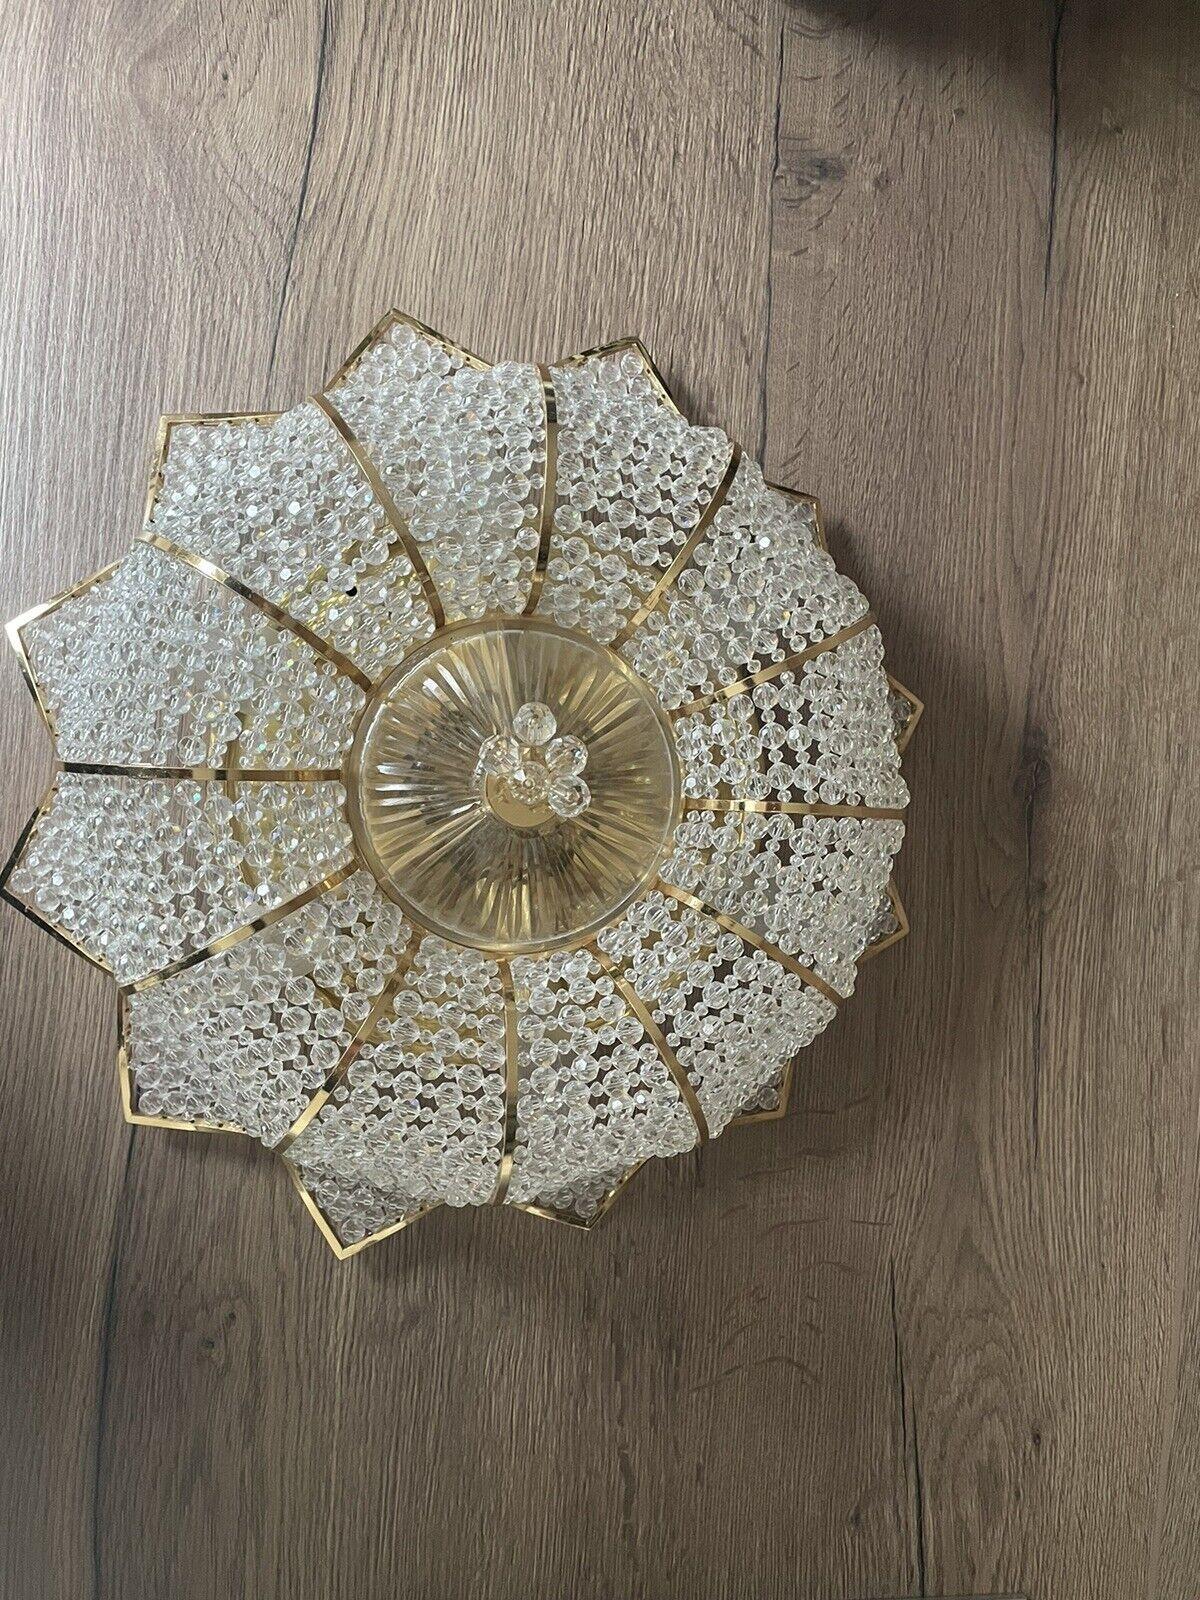 Mid-20th Century 1960s MCM  Cut Crystal Beaded Floral w/ 24K Framed Ceiling Flush Mount by Palwa For Sale